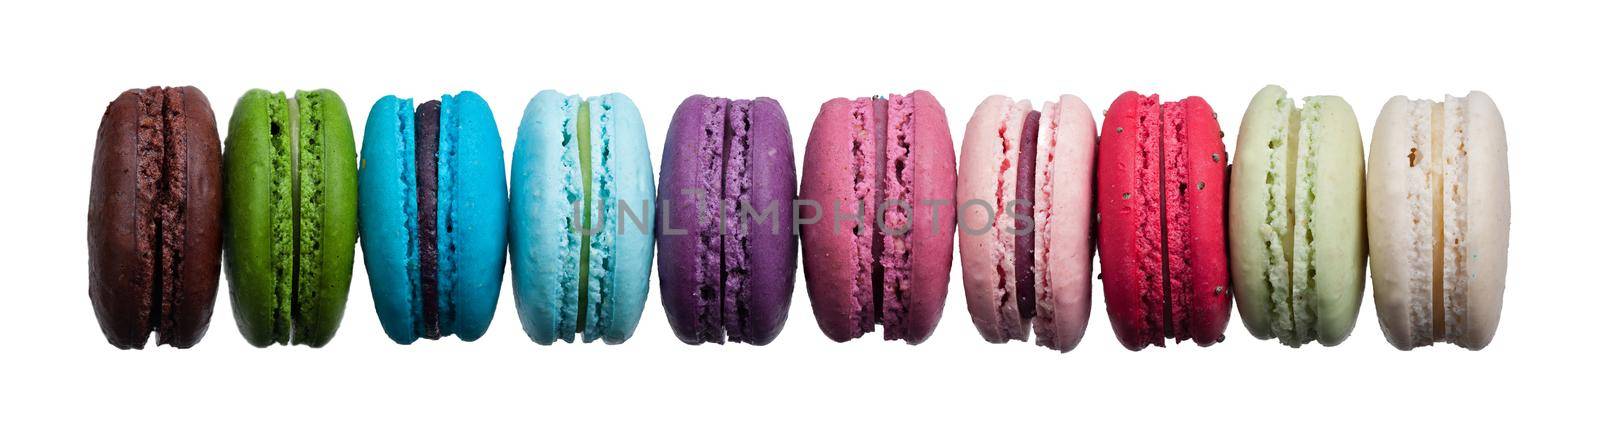 High-definition colored macaroons panorama by Lincikas